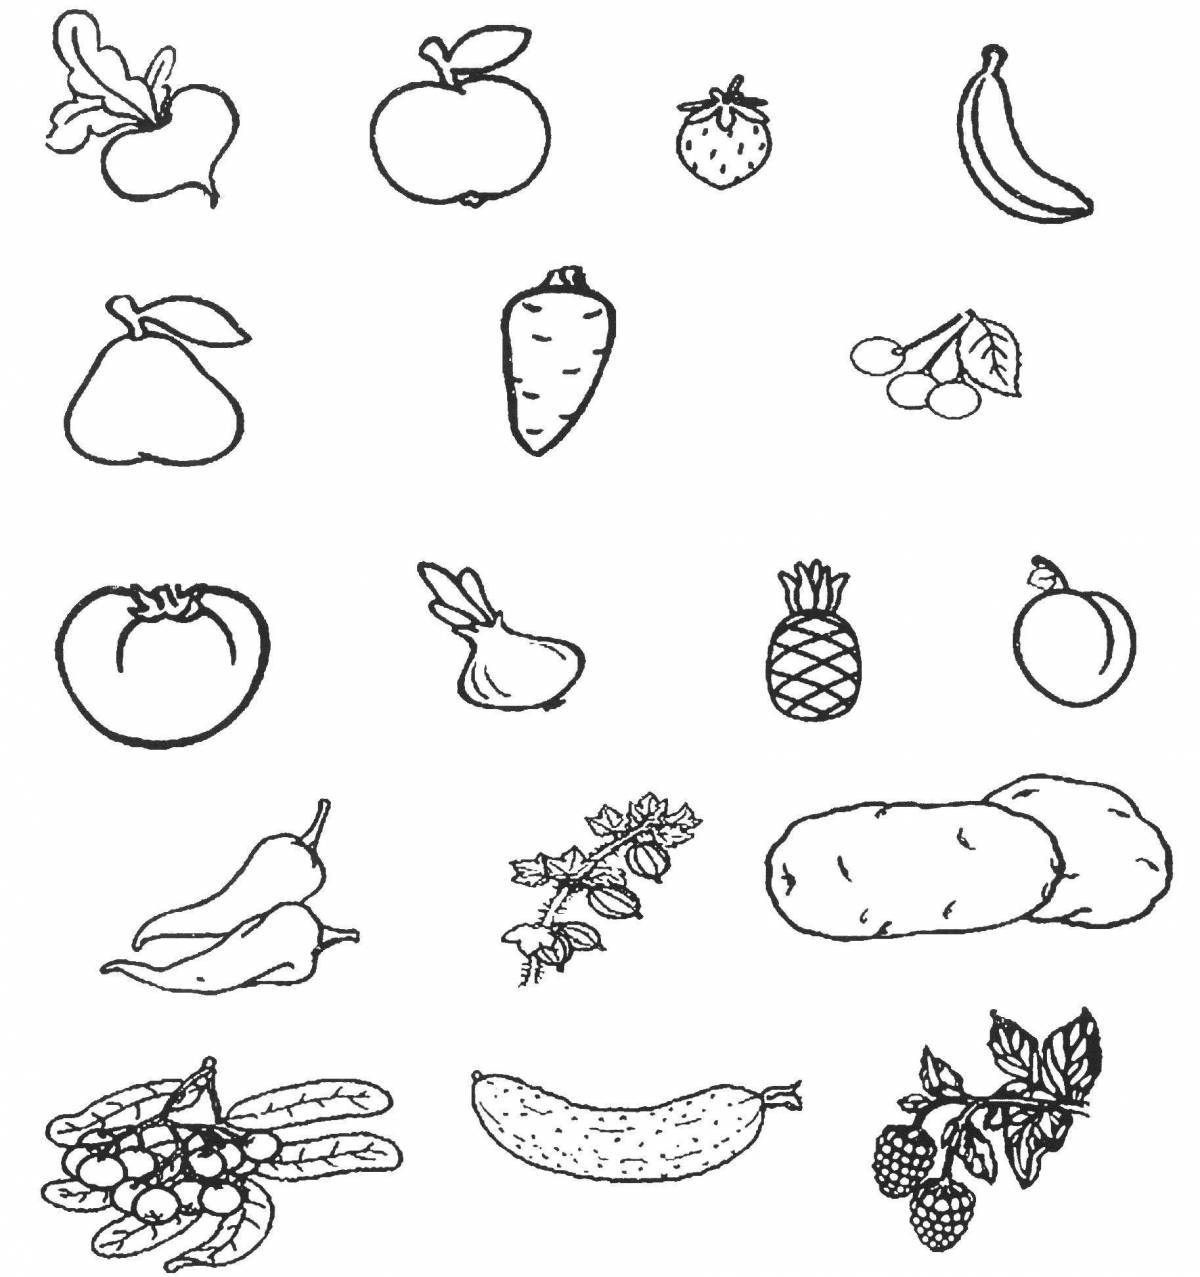 Fruits and vegetables #1